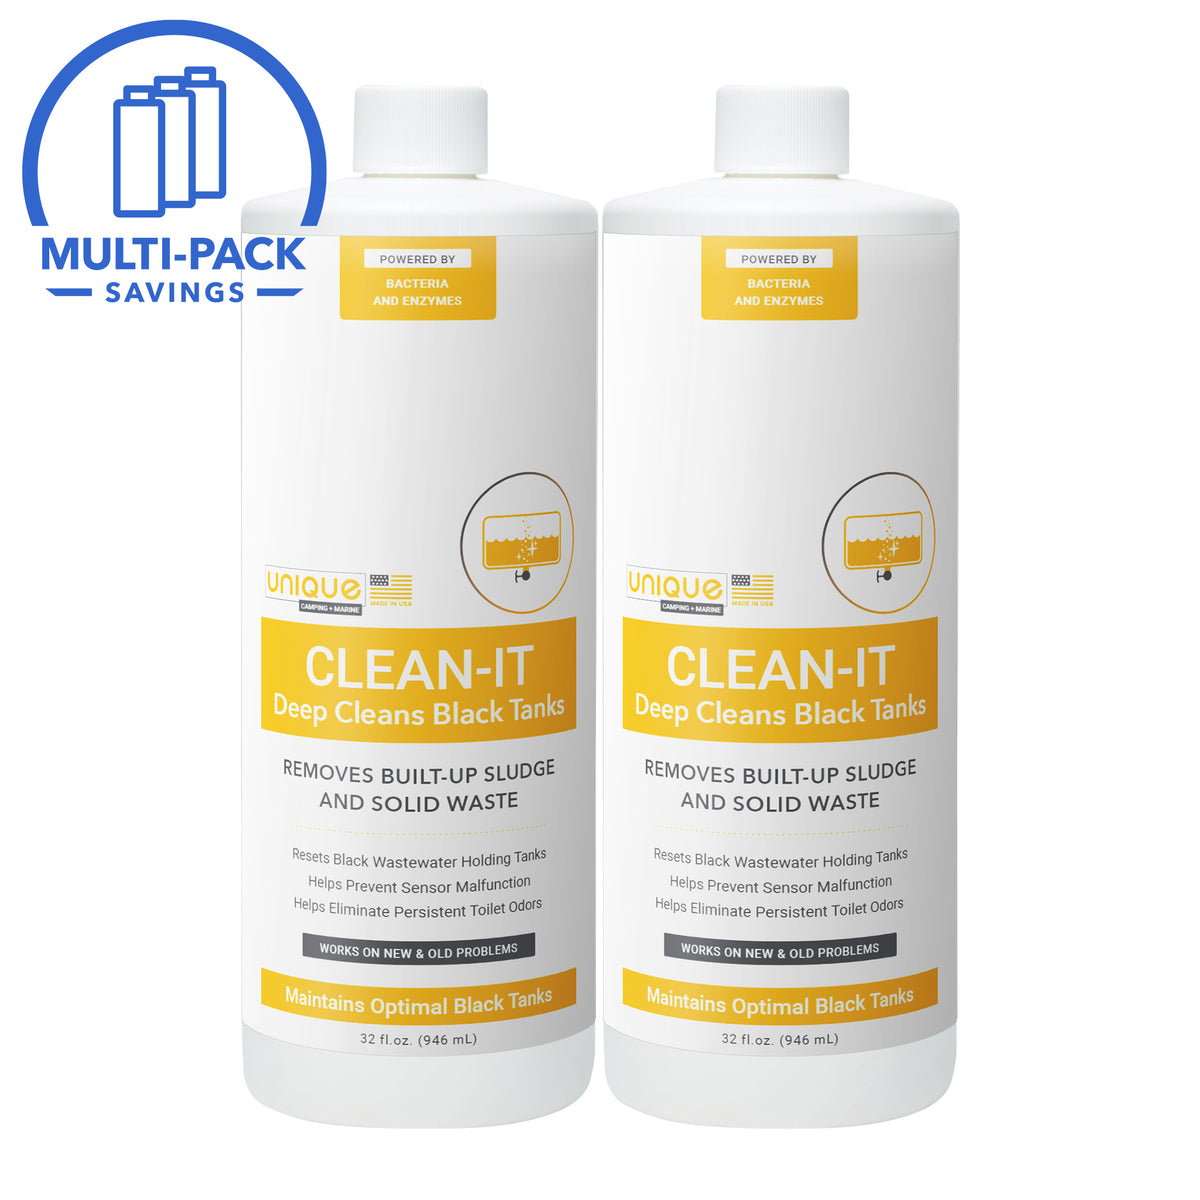 Clean-It Black Tank Deep Cleaner 2-Pack. Unqiue Camping + Marine